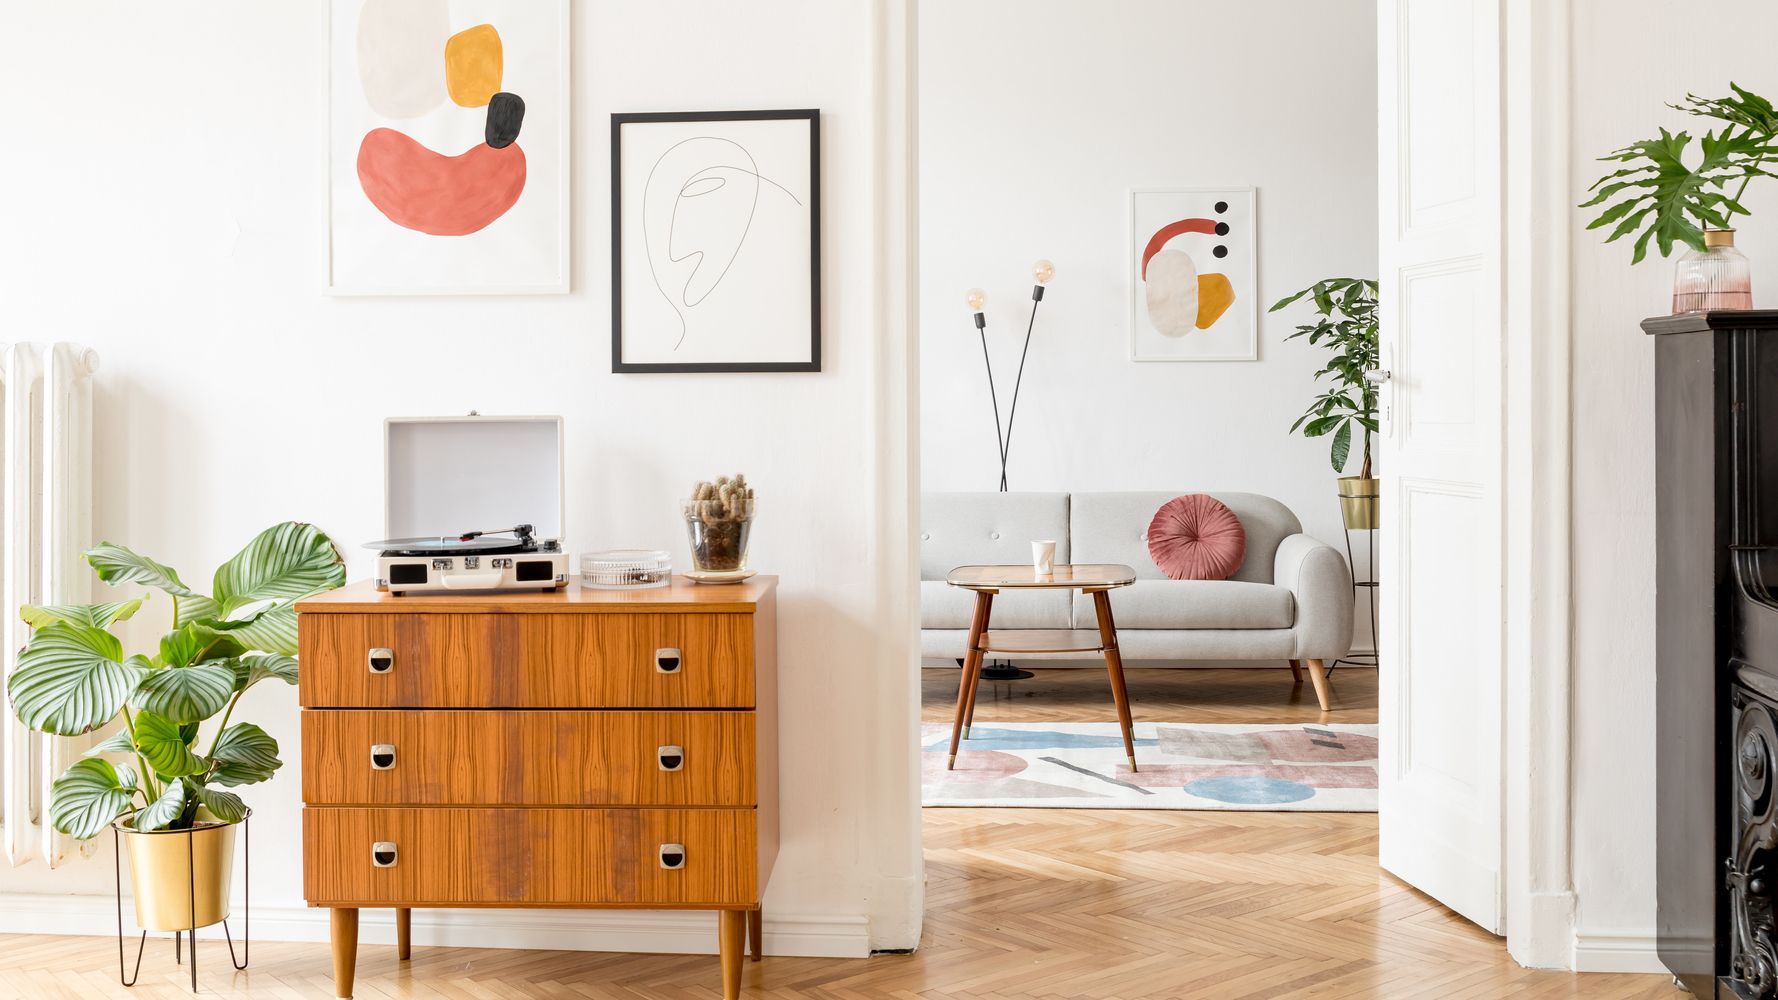 14 Furniture Stores Like West Elm To Buy Mid Century Modern Home